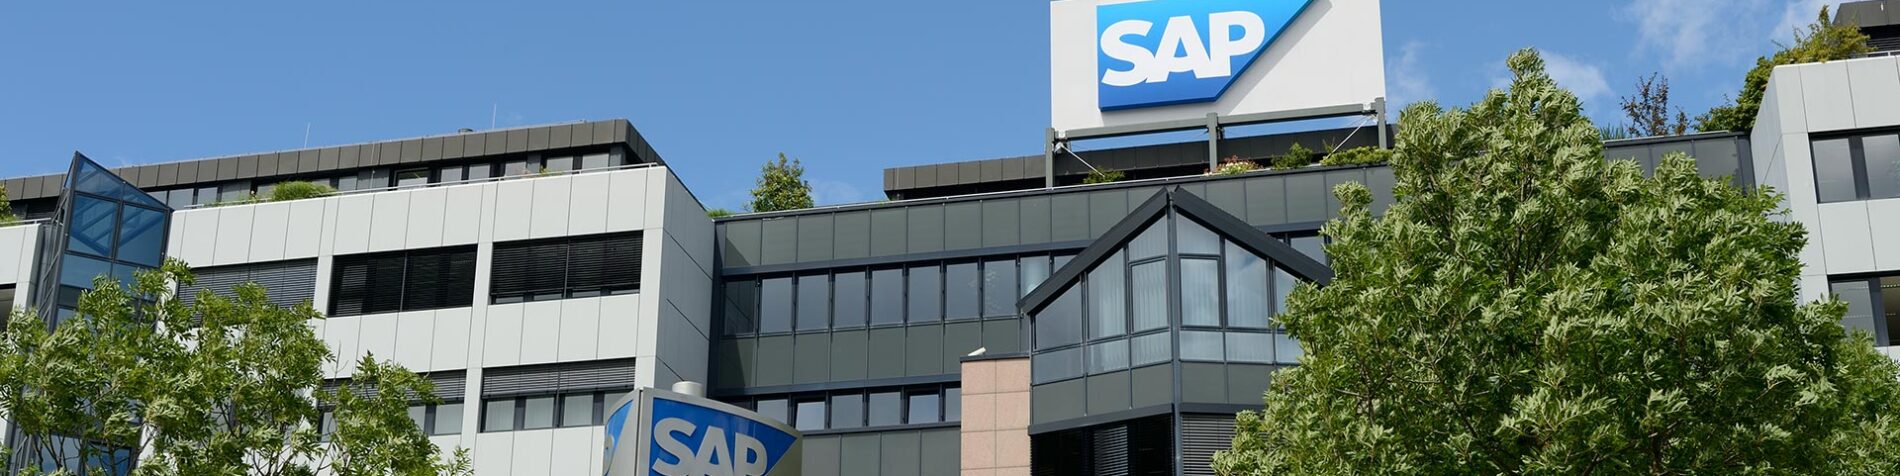 SAP to Announce Second Quarter 2015 Results